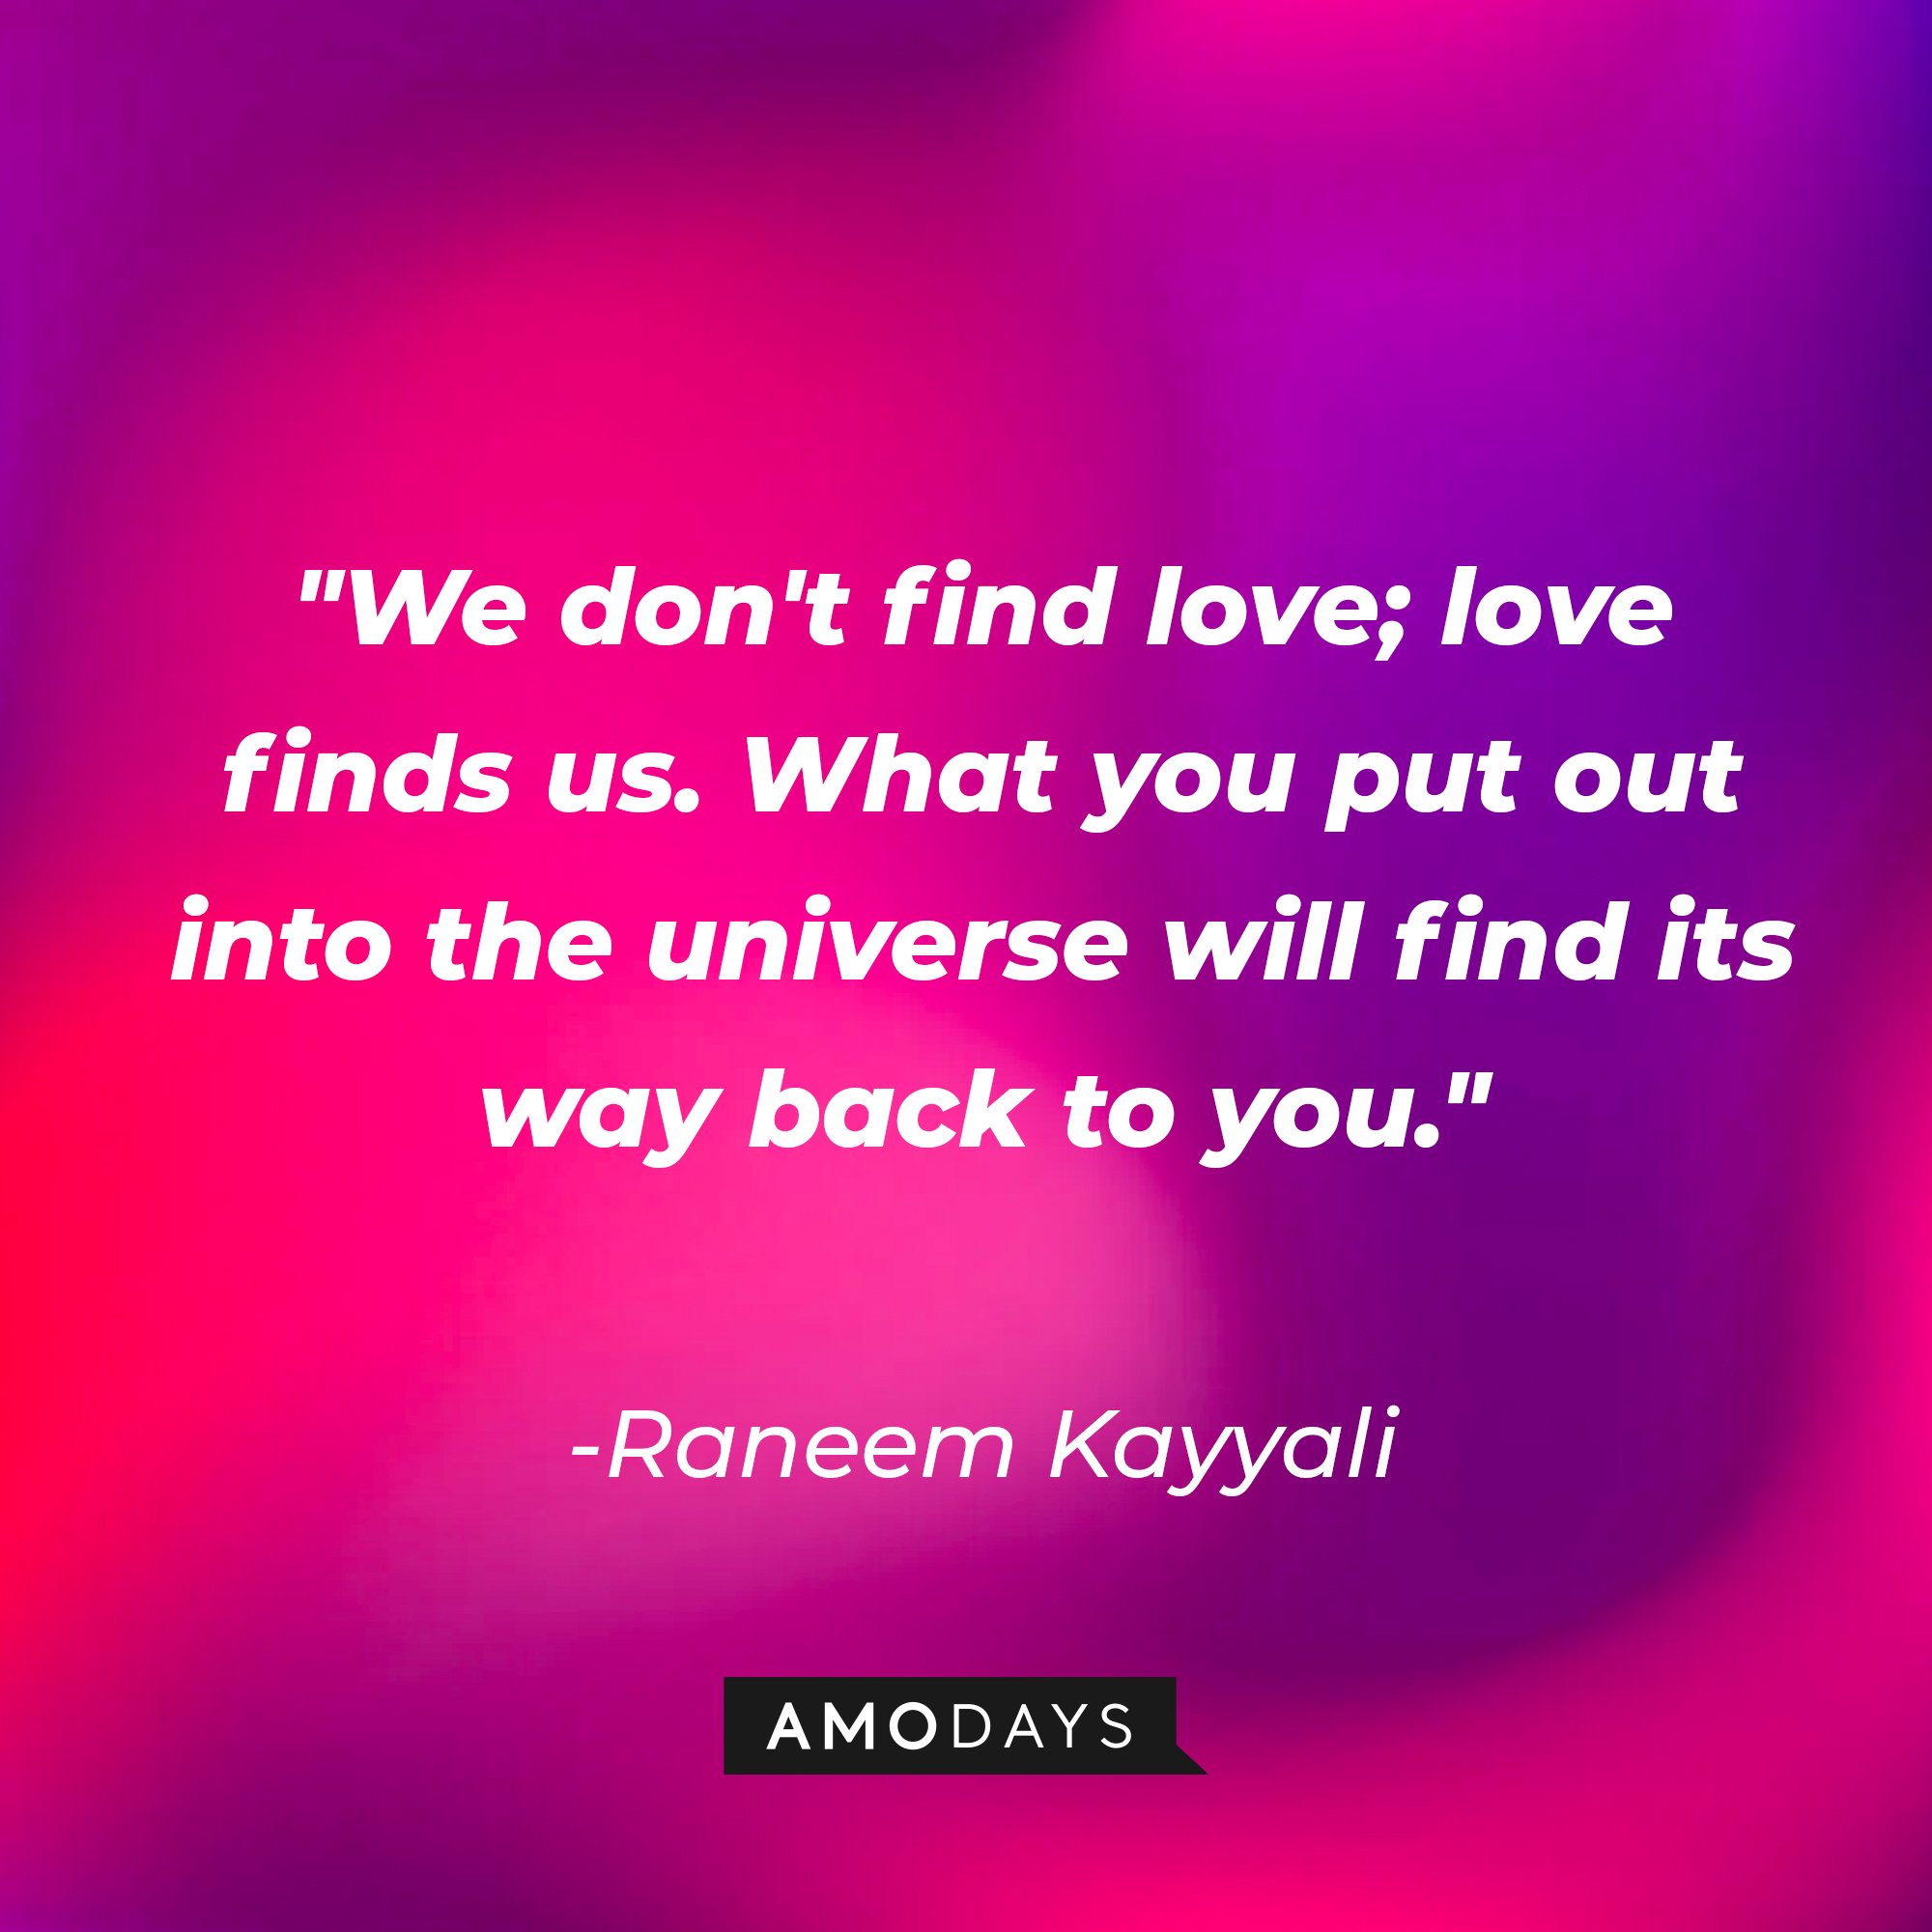 Raneem Kayyali’s quote: “We don’t find love; love finds us. What you put out into the universe will find its way back to you." | Image: AmoDays